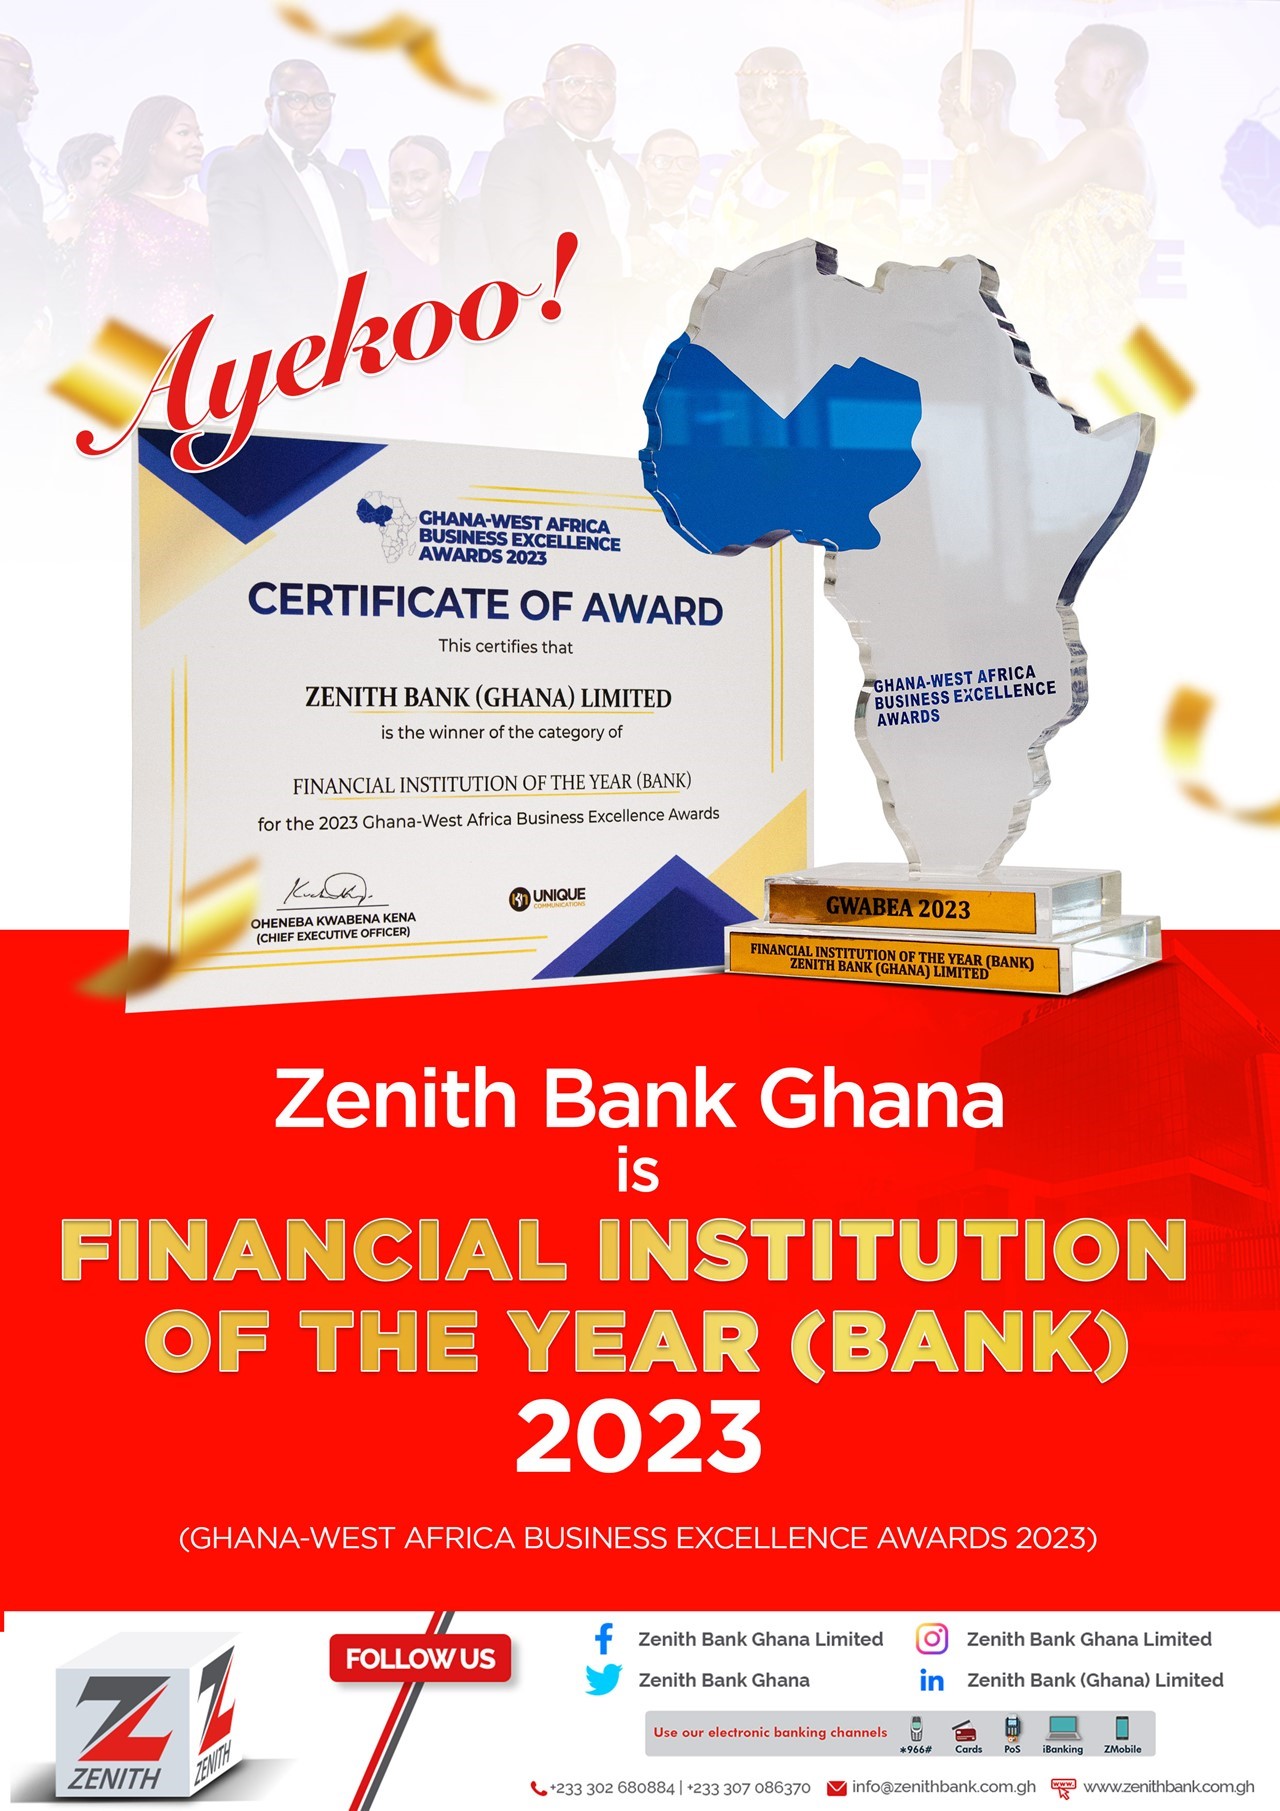 Zenith Bank is Financial Institution of the Year (Bank) 2023